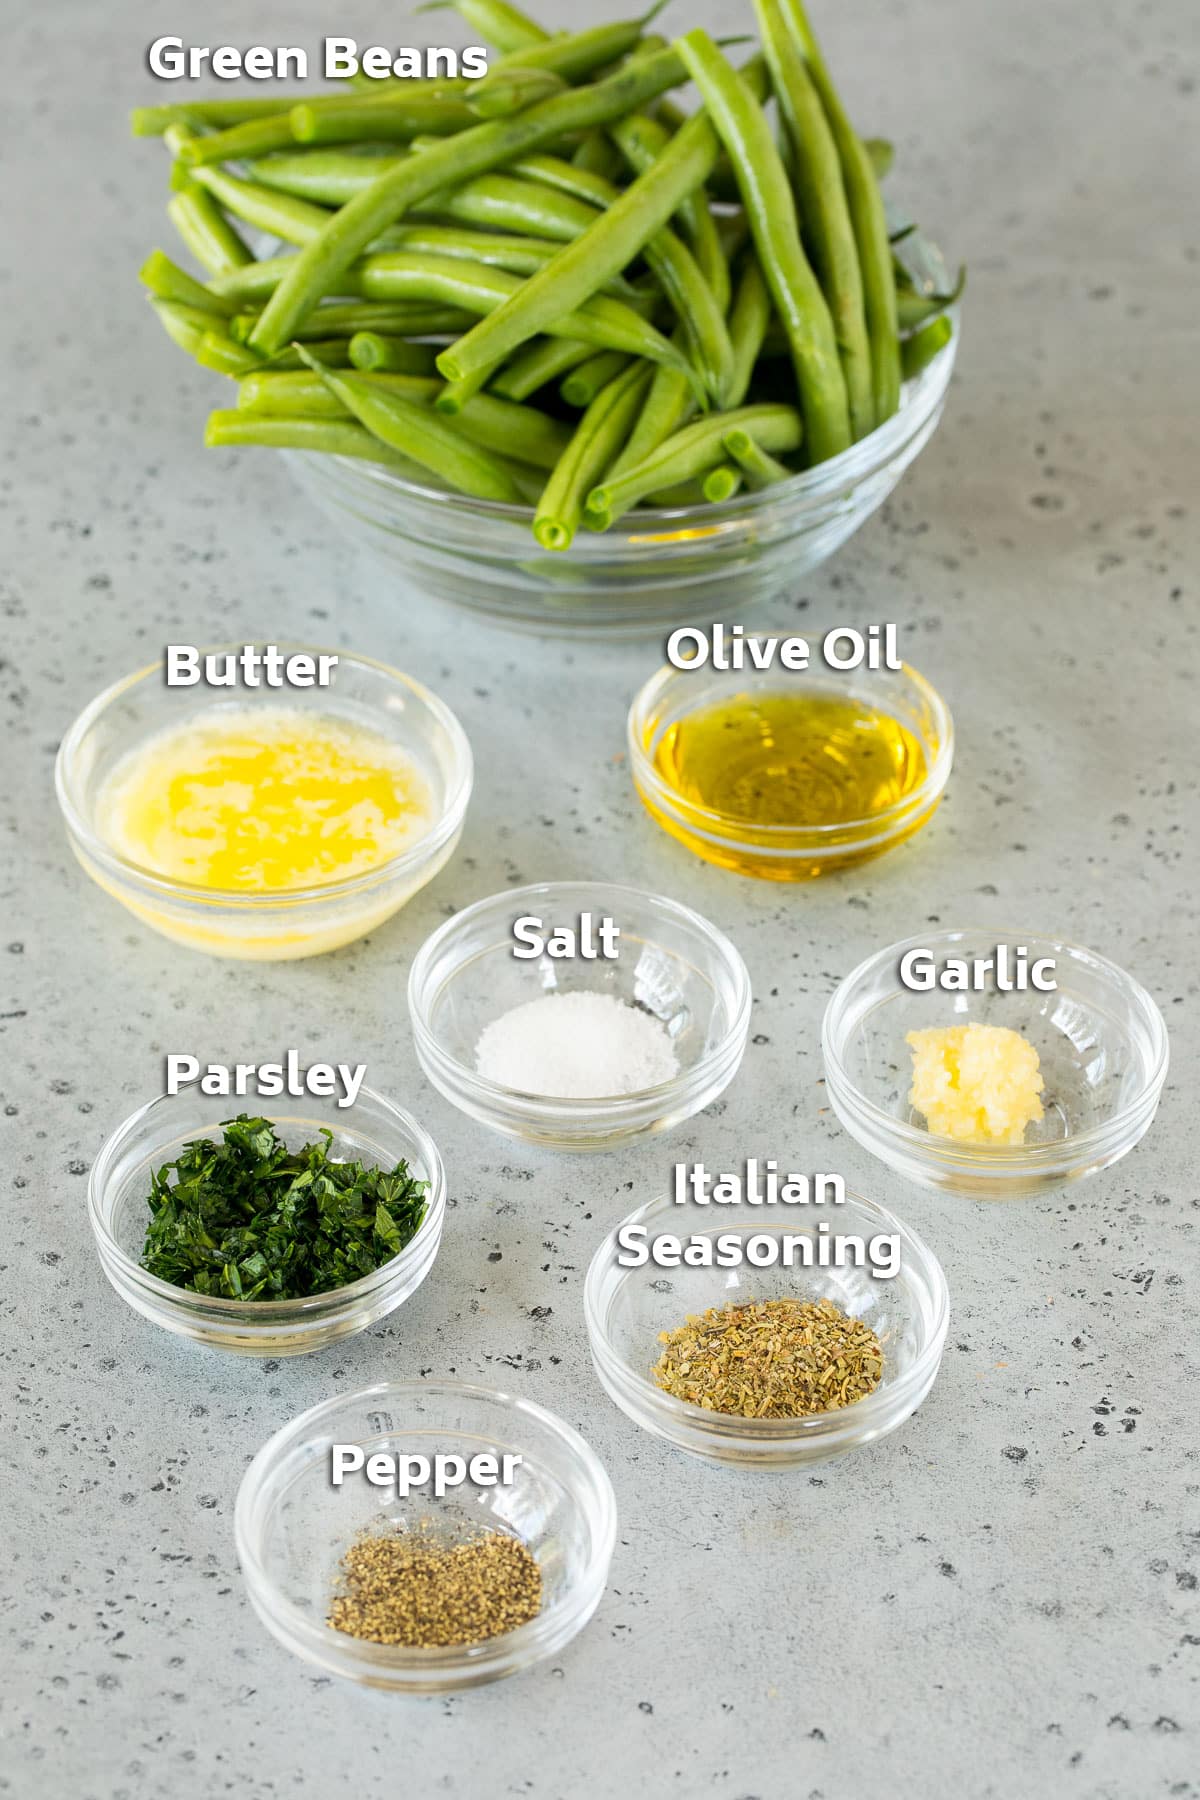 Bowls of ingredients including green beans, olive oil, butter and seasonings.